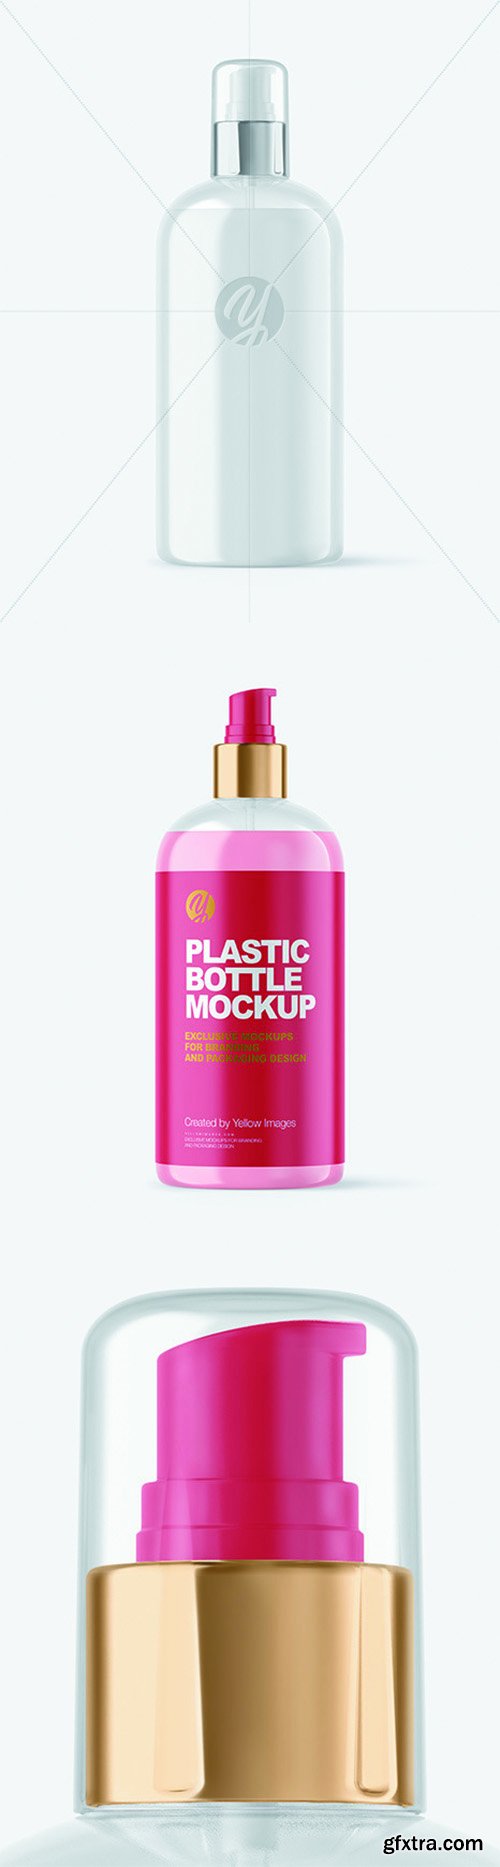 Clear Liquid Soap Bottle with Pump Mockup 66360